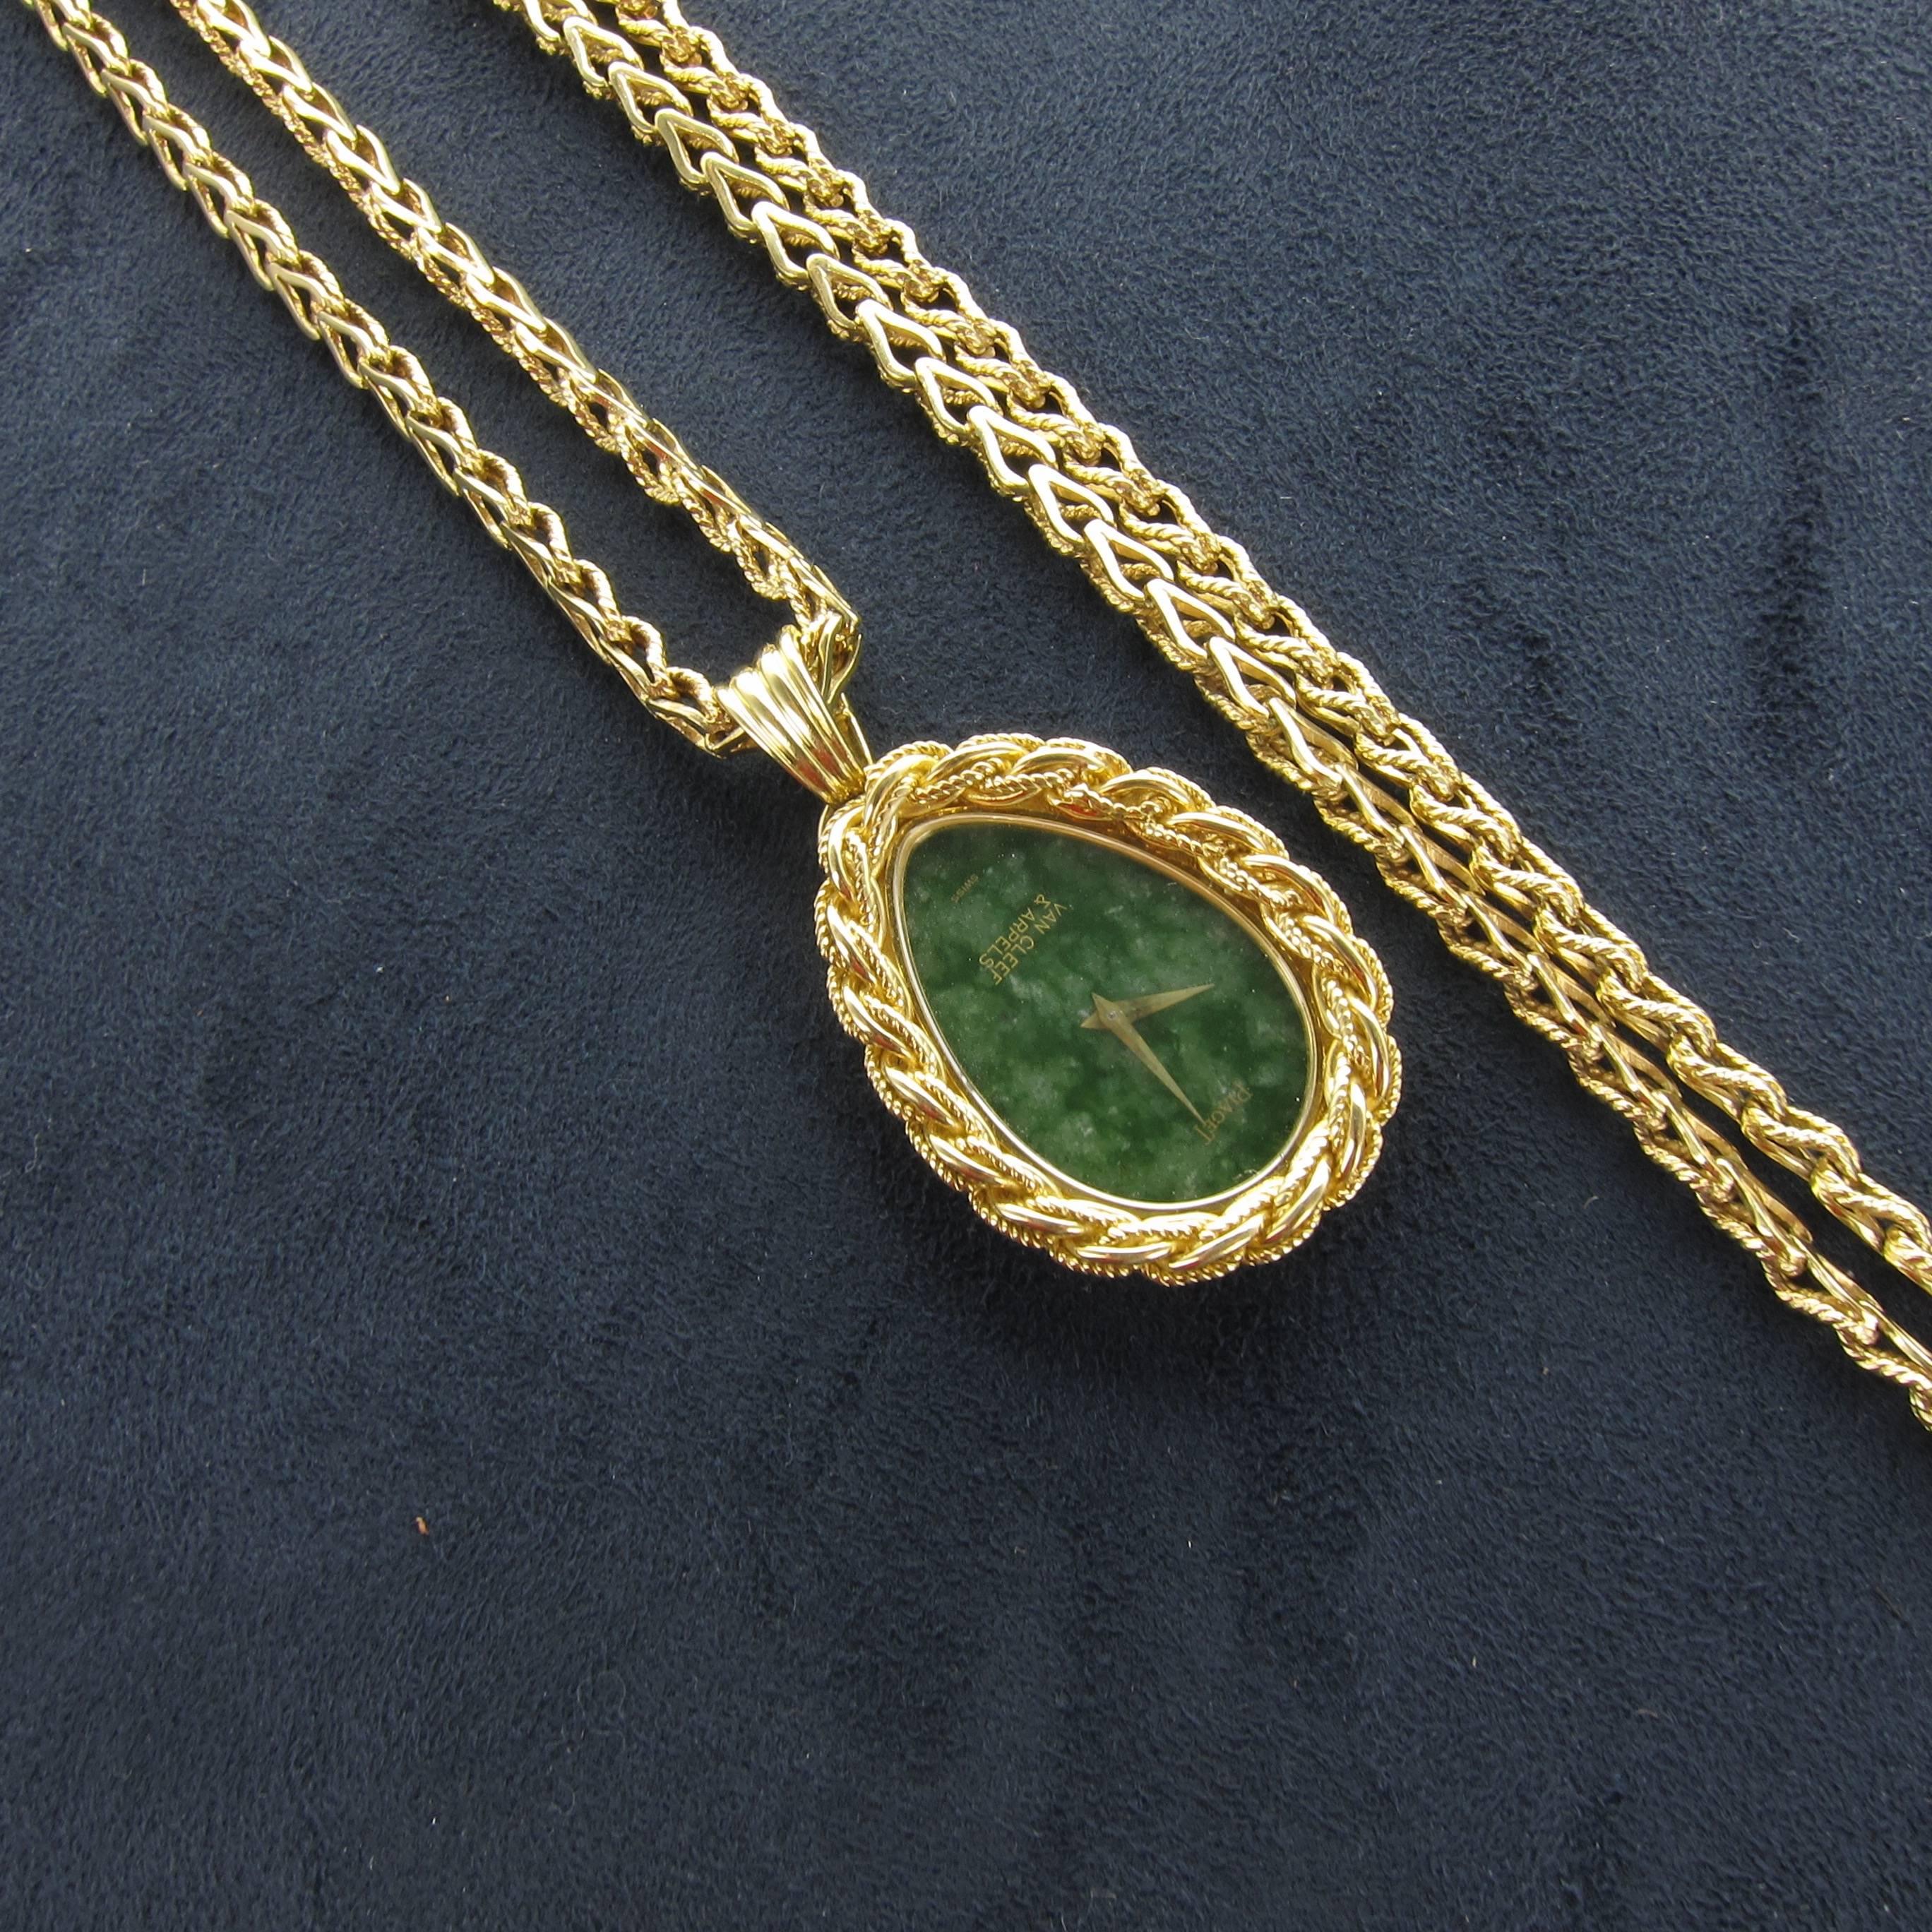 A 1970's Piaget yellow gold woven-link necklace with hanging pendant watch. Retailed by Van Cleef & Arpels. Nephrite Jade dial signed Piaget and Van Cleef & Arpels.

Mechanical Movement